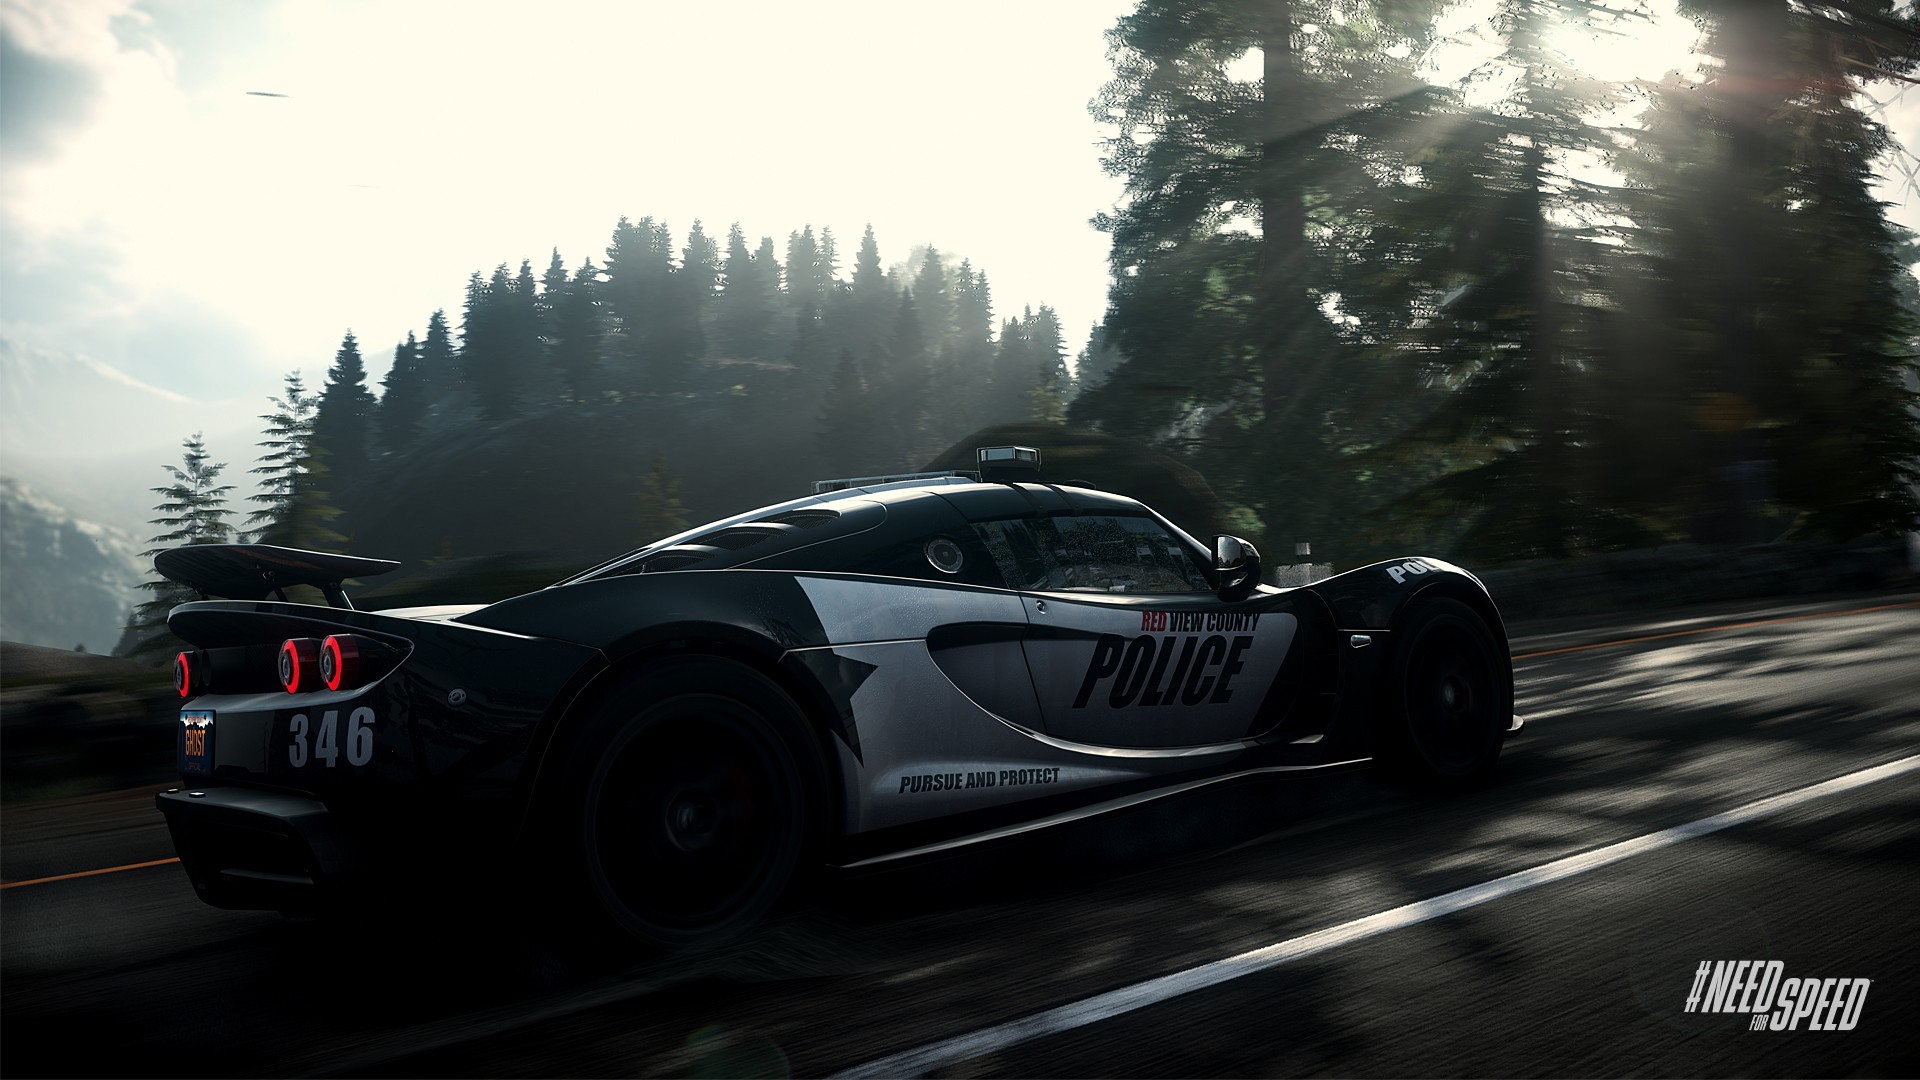 car, Need for Speed, Police cars, Trees, Road, Tail light, Spoilers, Motion blur Wallpaper